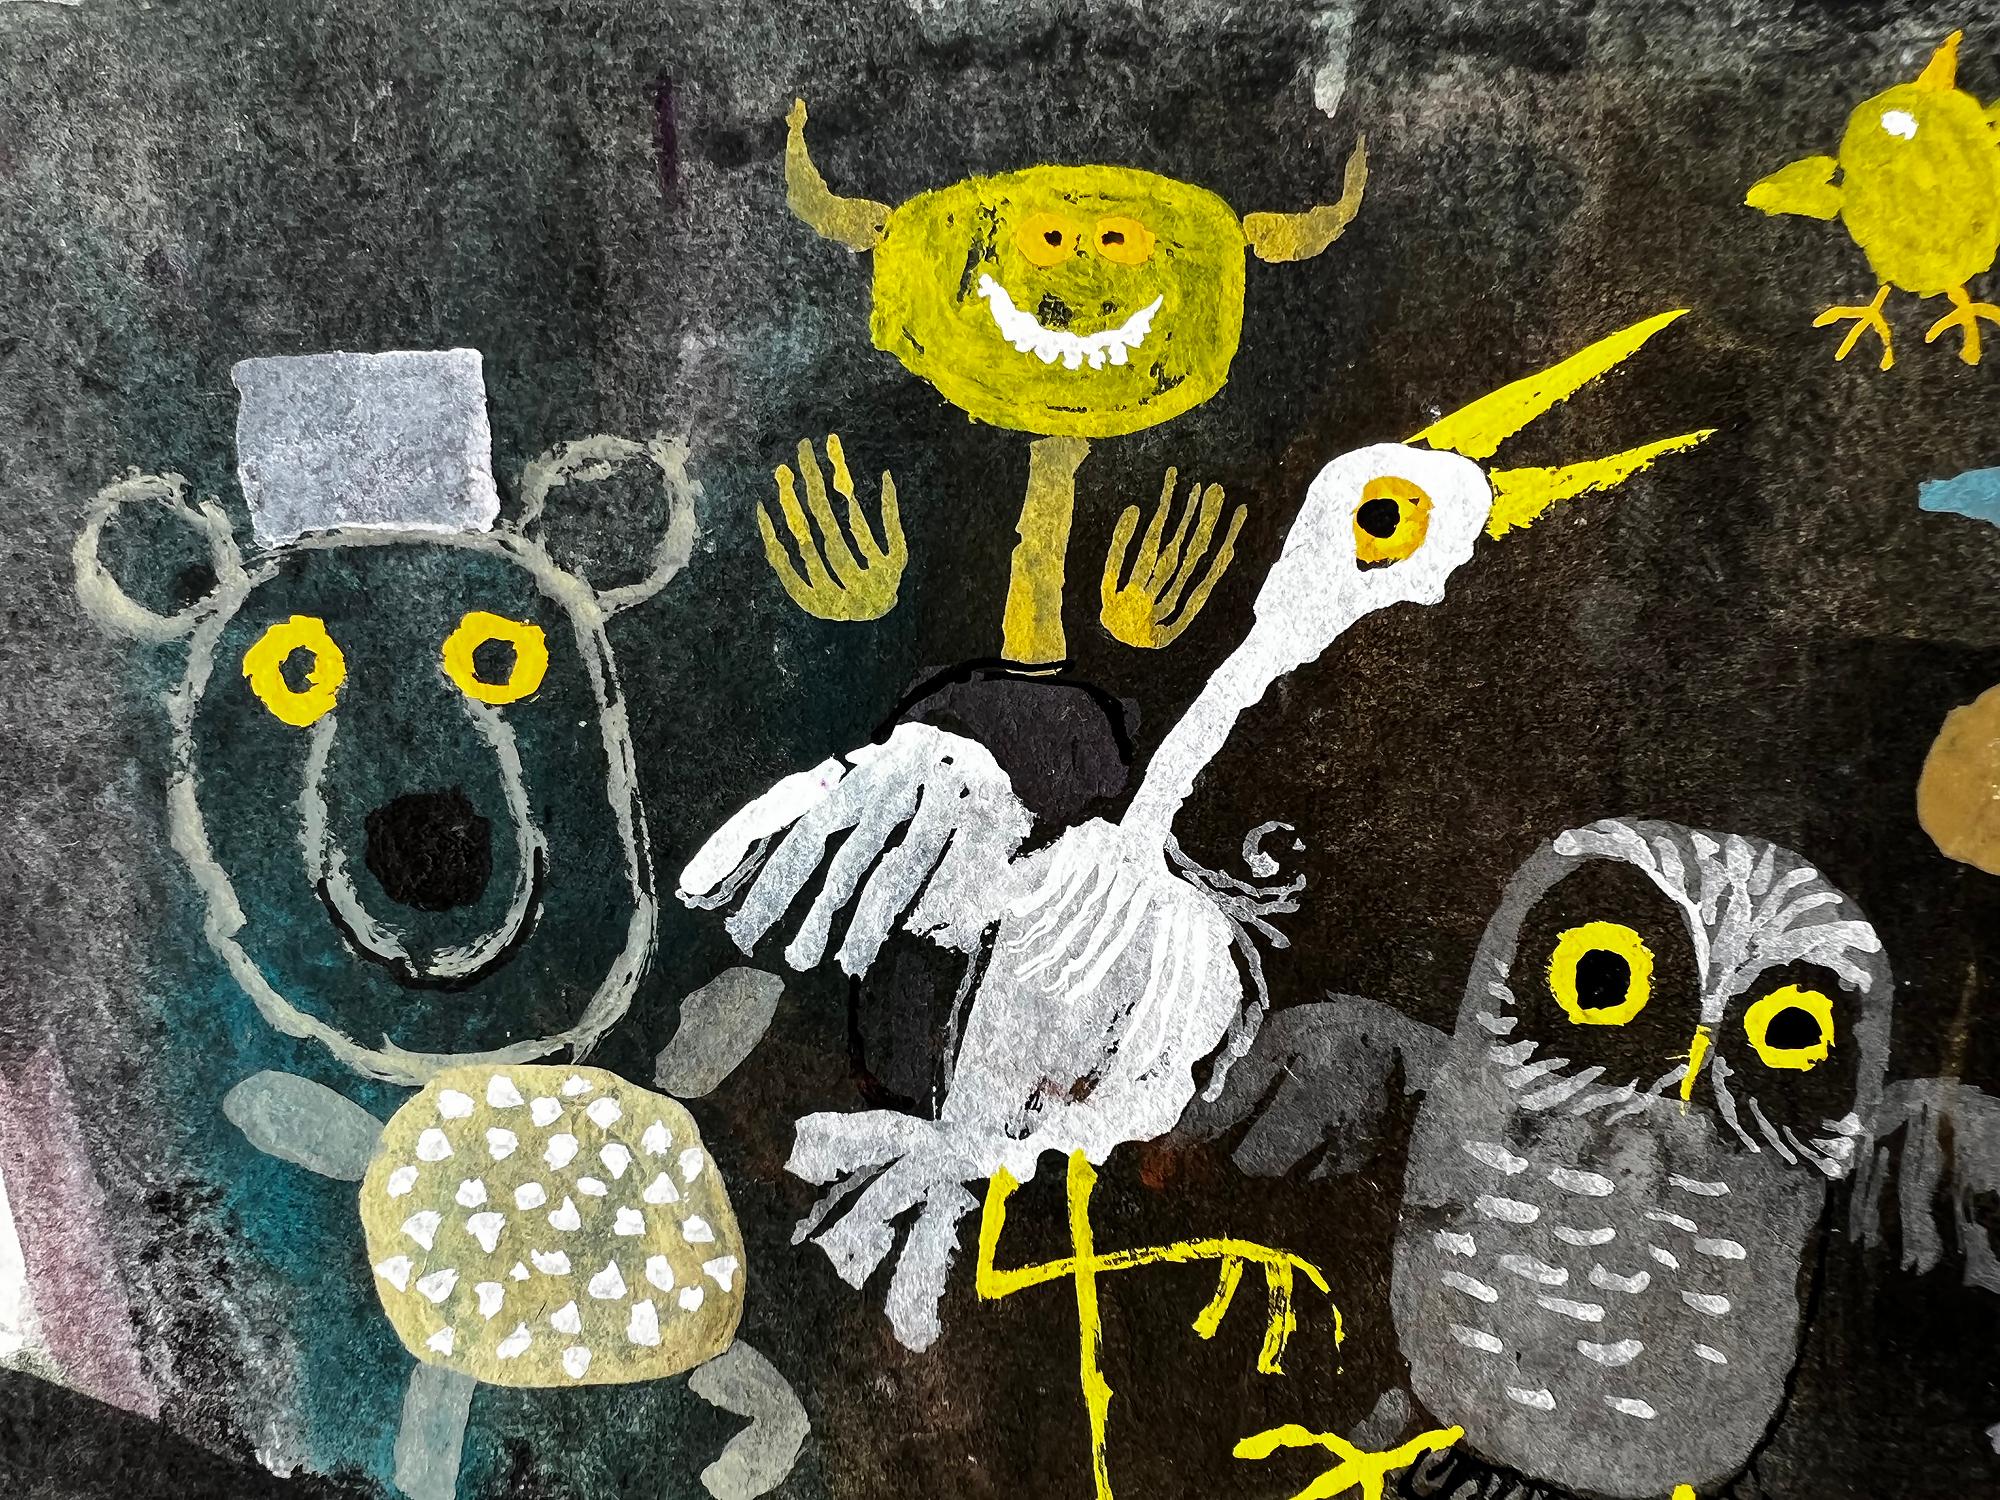 Dancing Animal Critters on a Top Hat, Bear, Frog, Owl, Crane Bird, Bee, Snail - American Modern Art by Alice and Martin Provensen